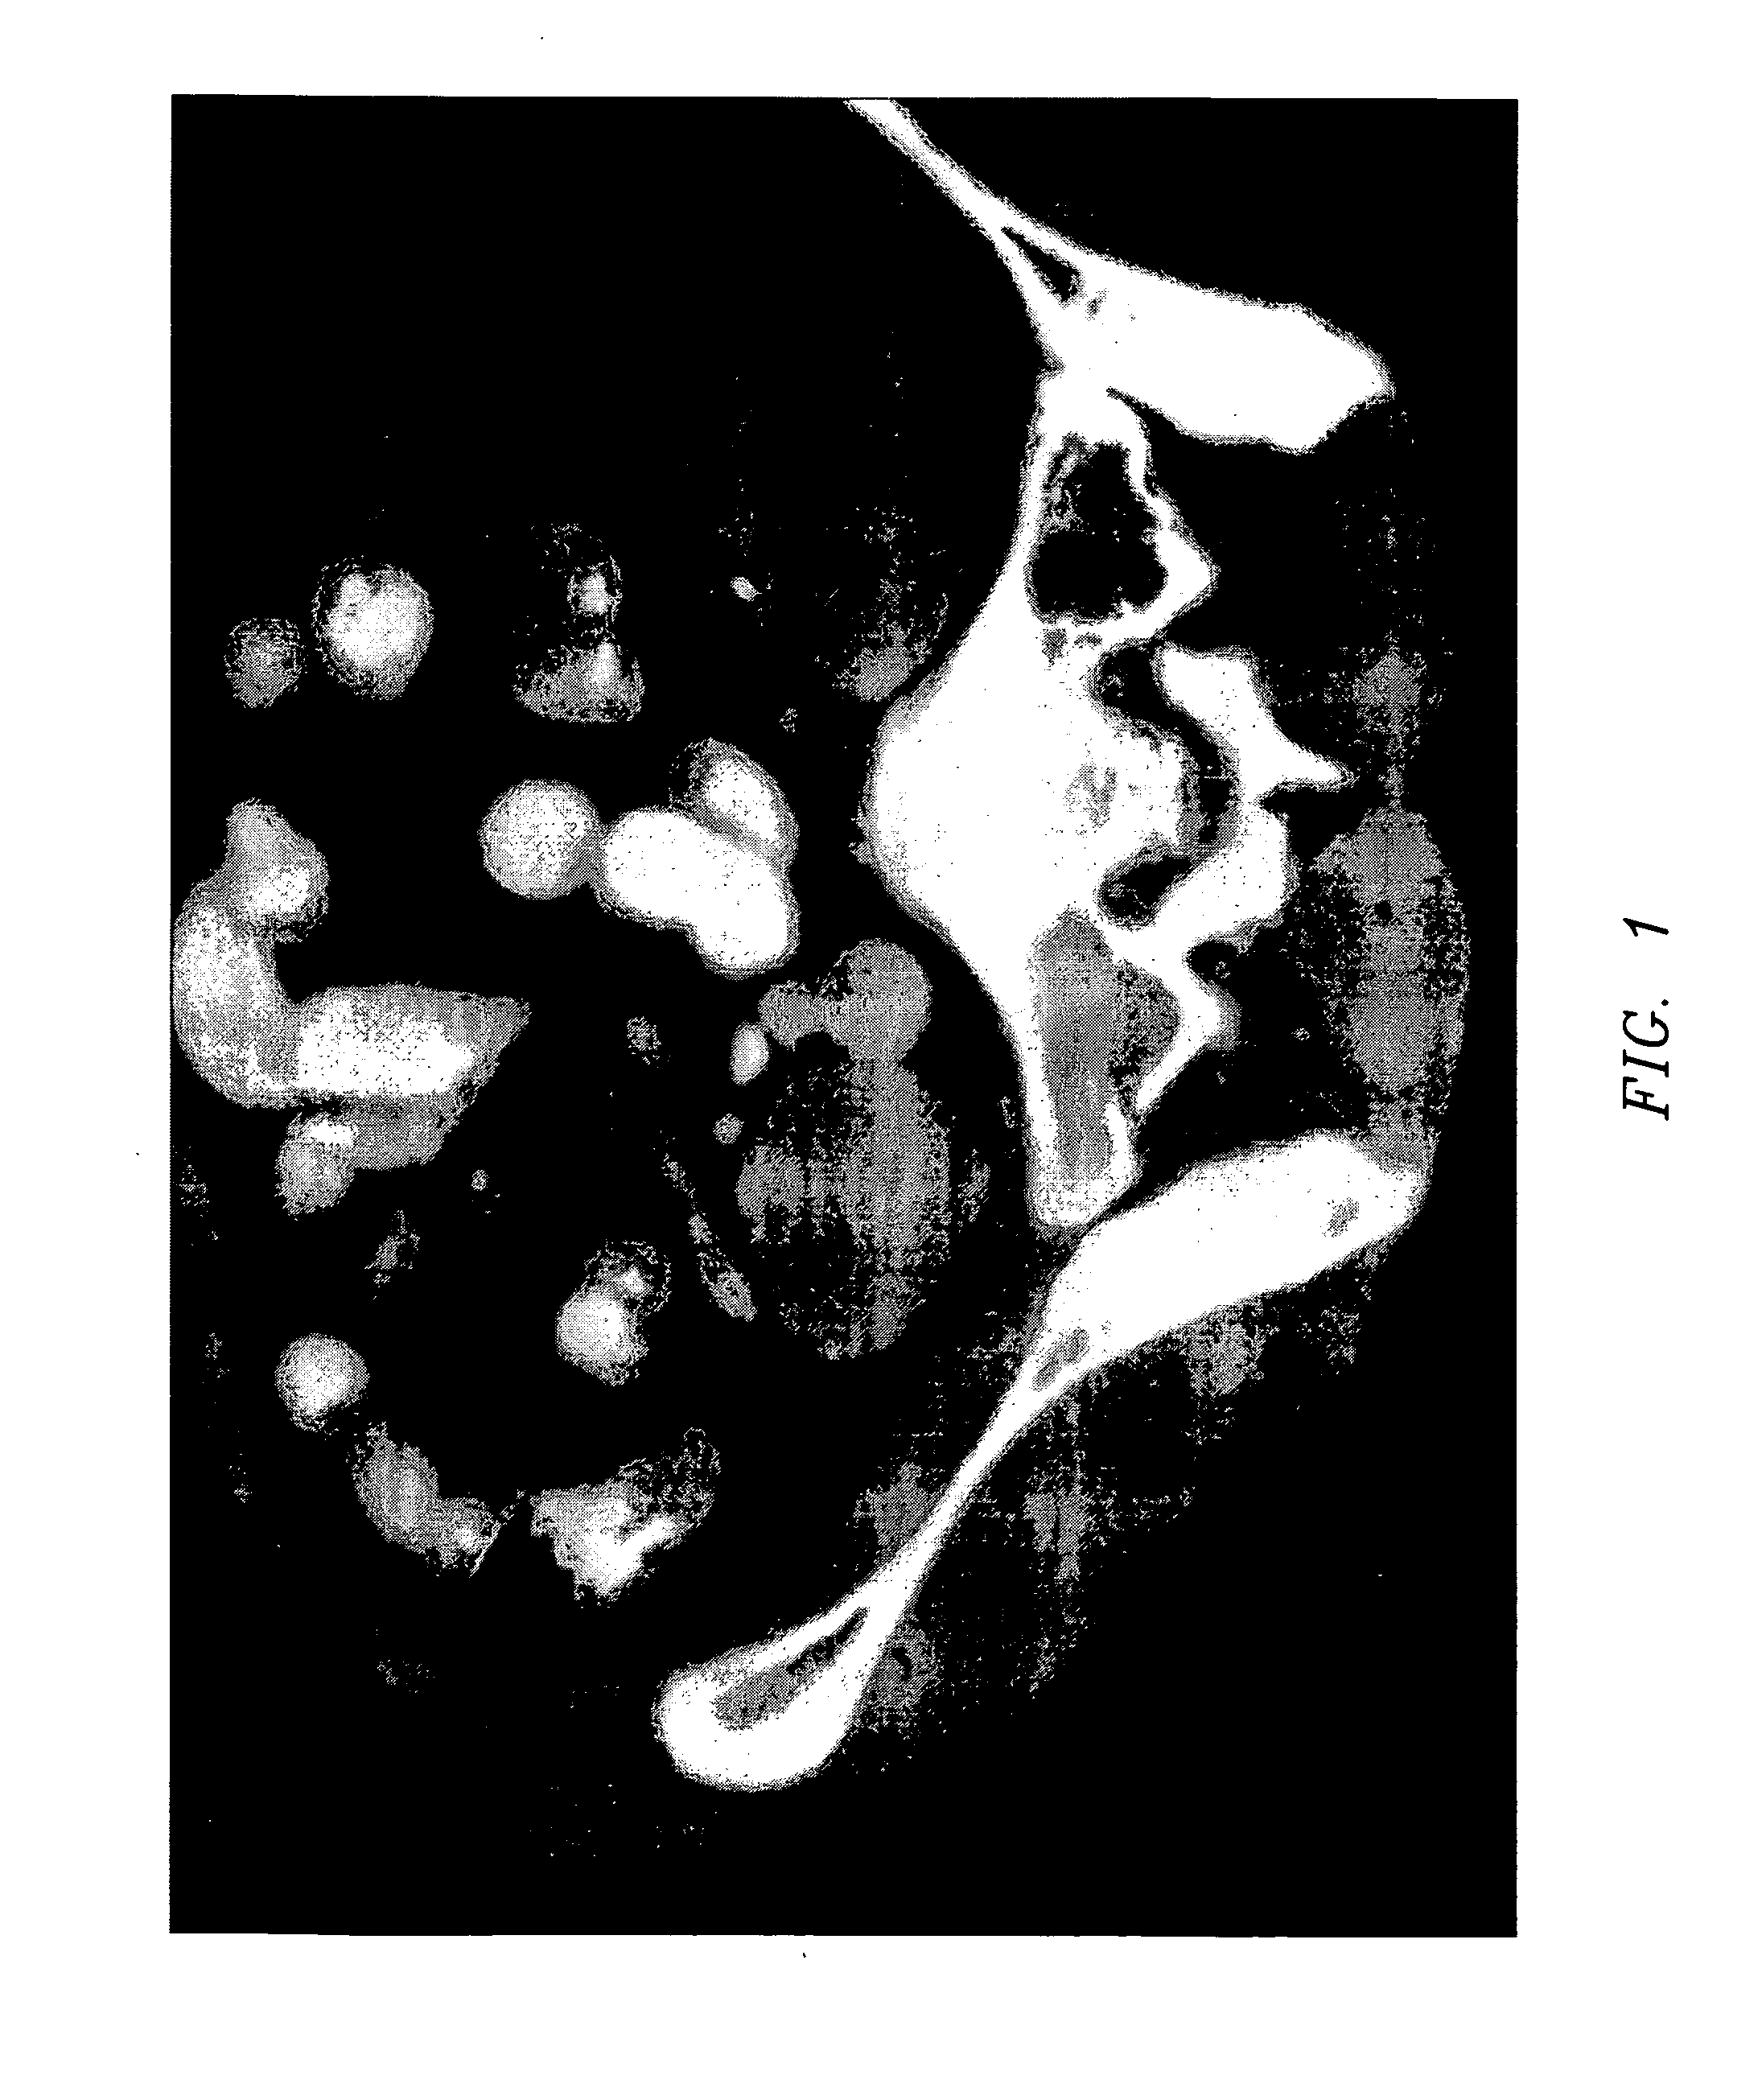 Composition and method for direct visualization of the human appendix